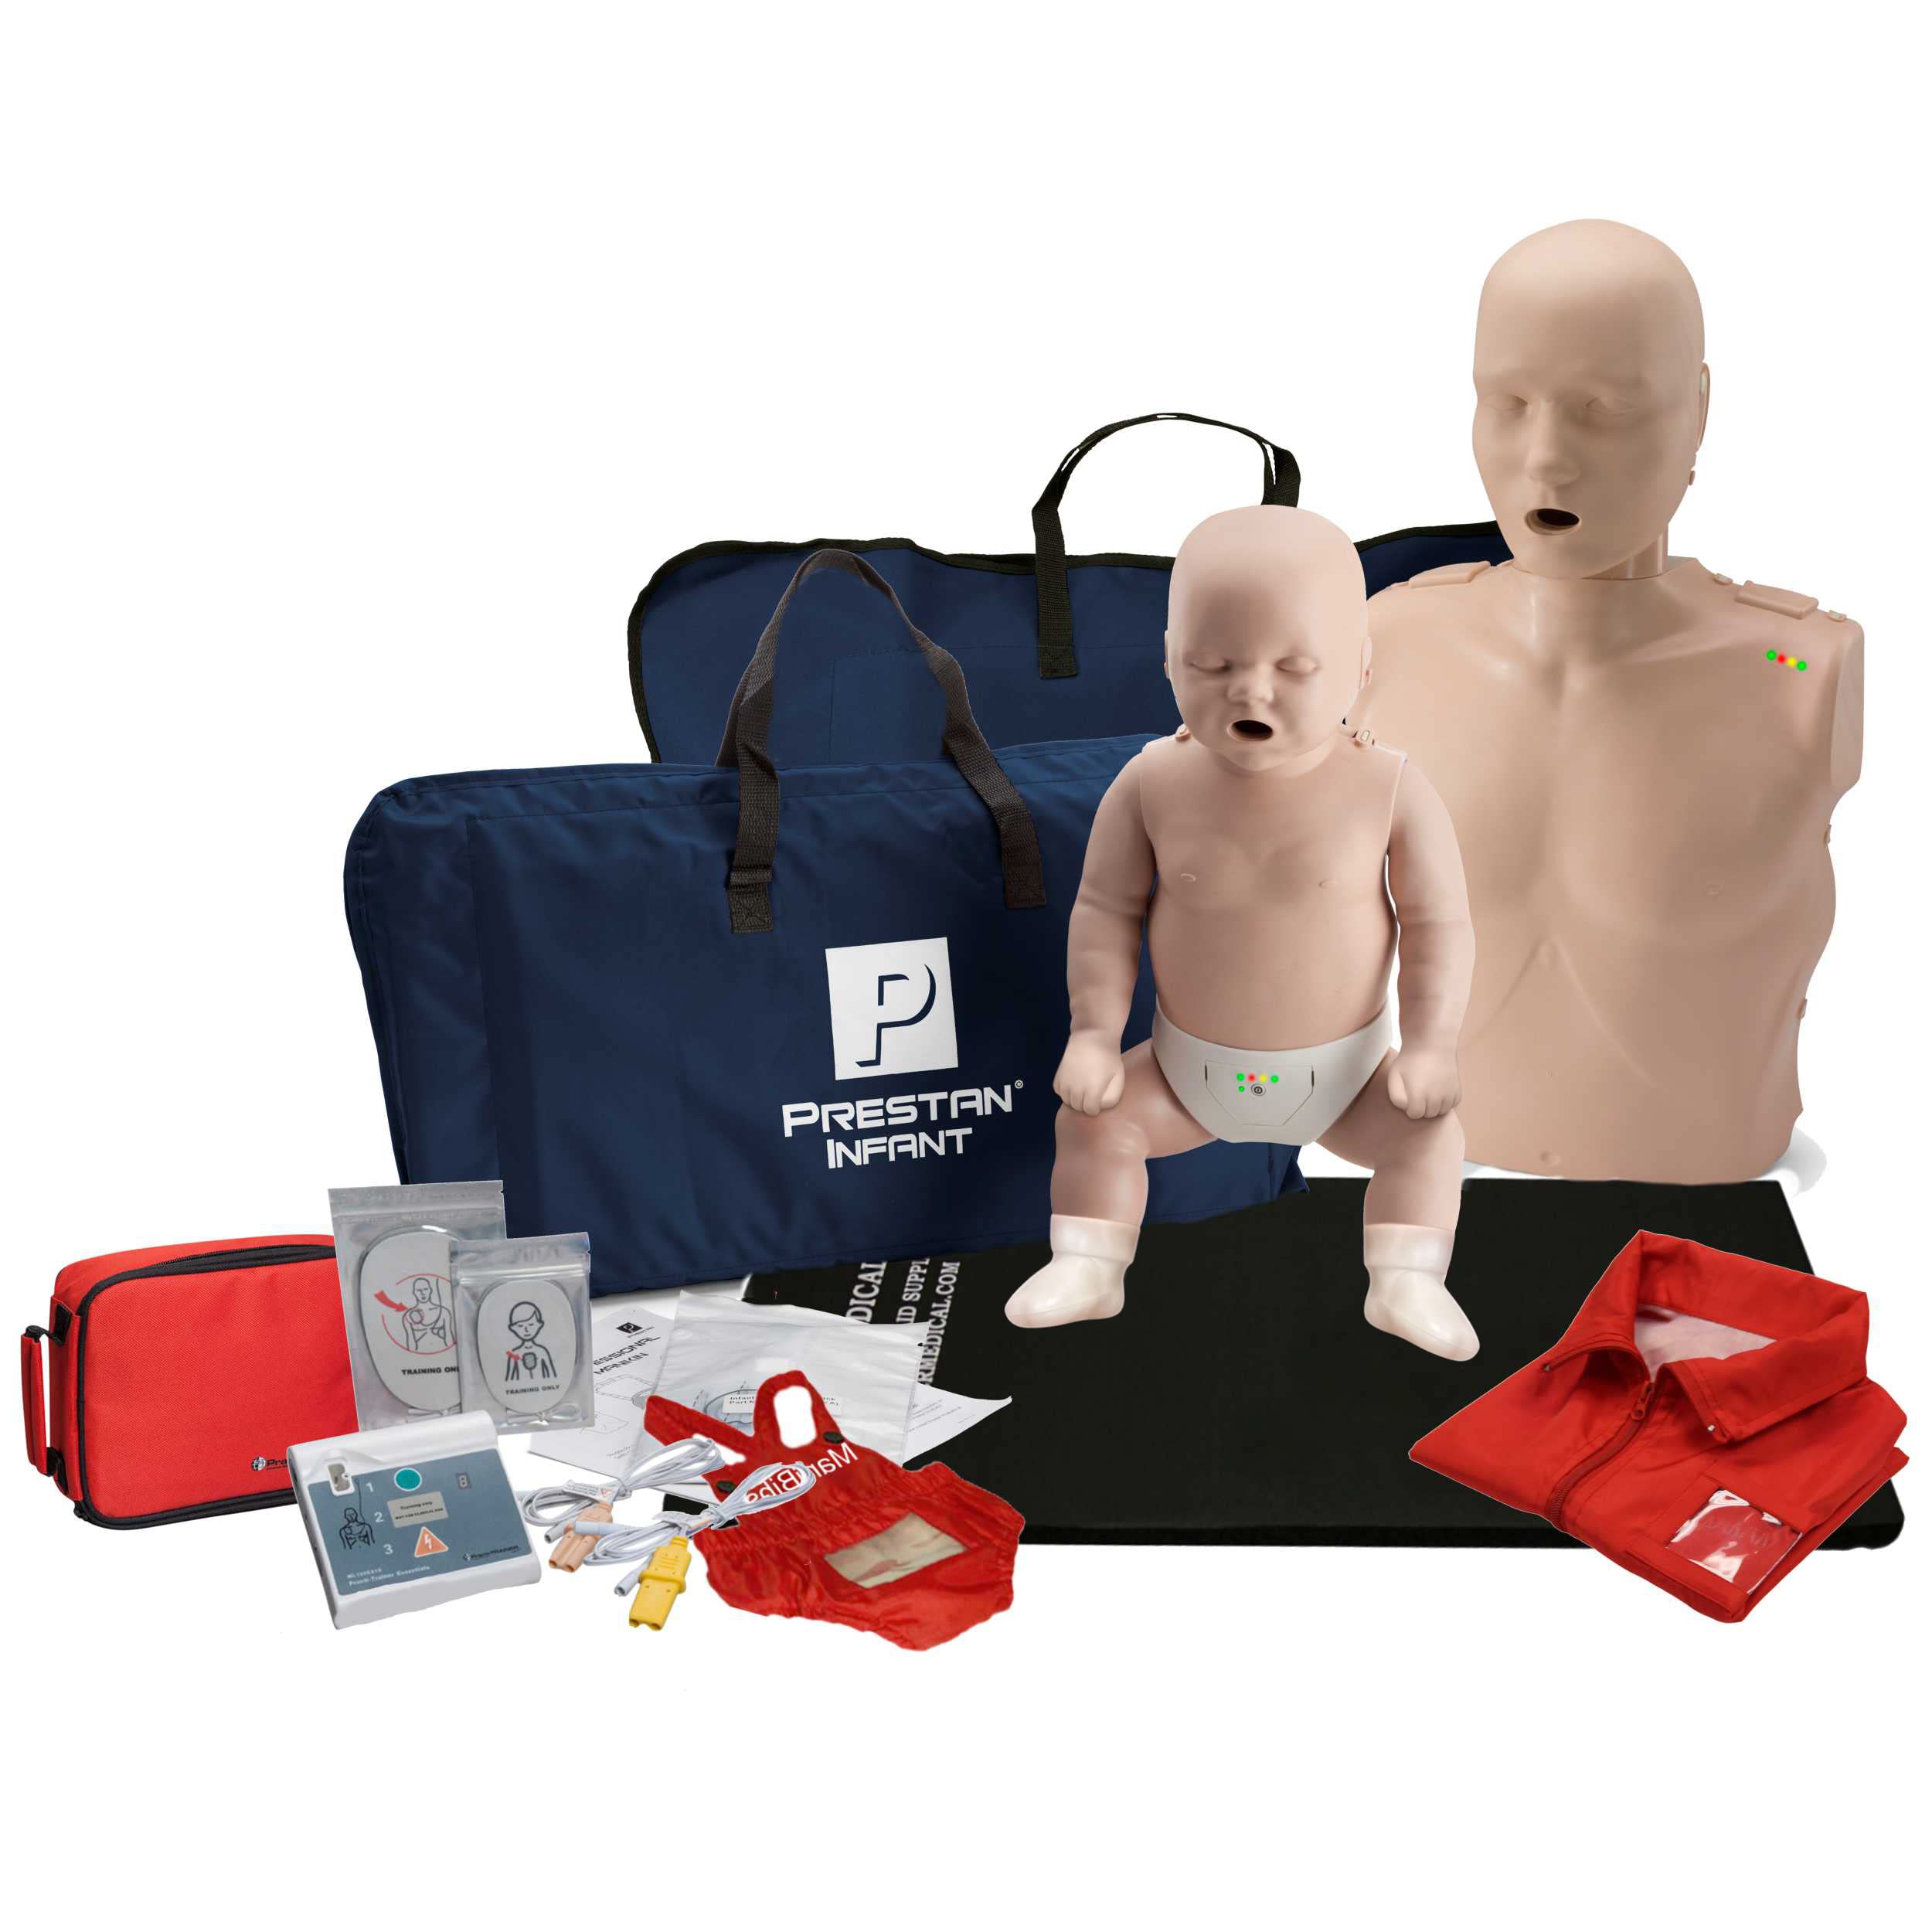 AED Trainers and CPR Manikins Supplier in Saudi Arabia KSA